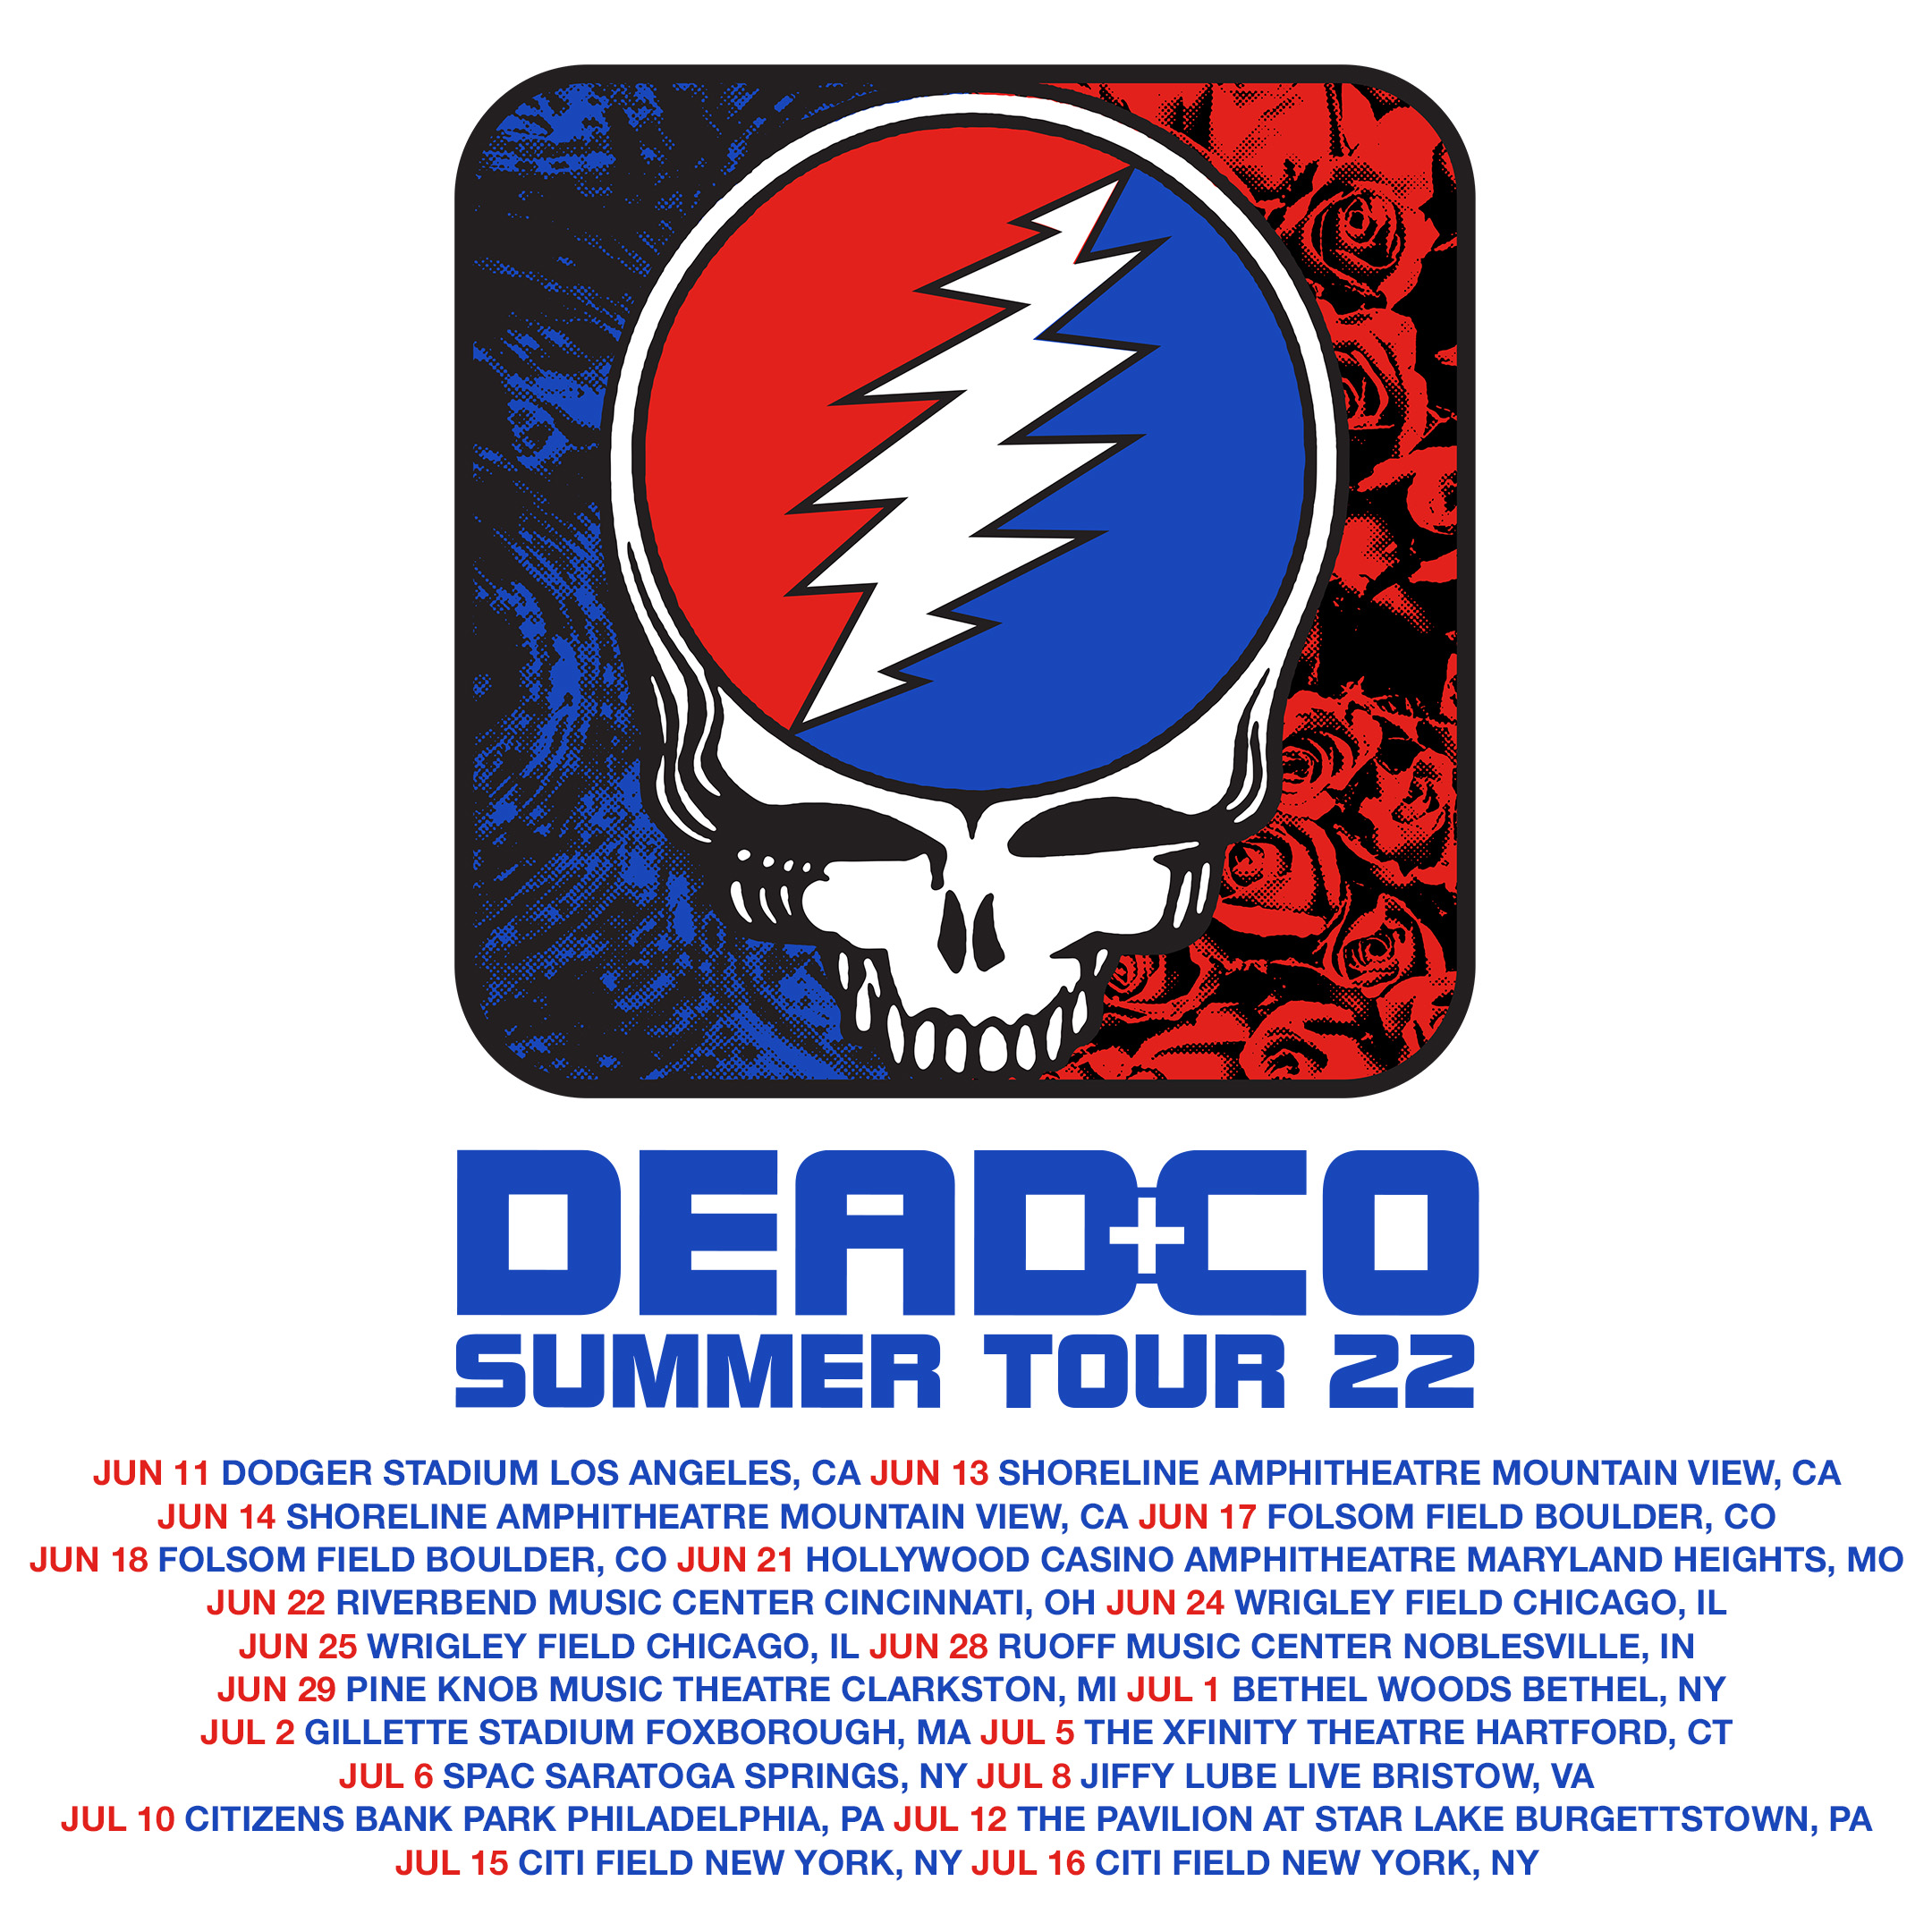 Just Announced: Dead & Company Summer Tour 22!